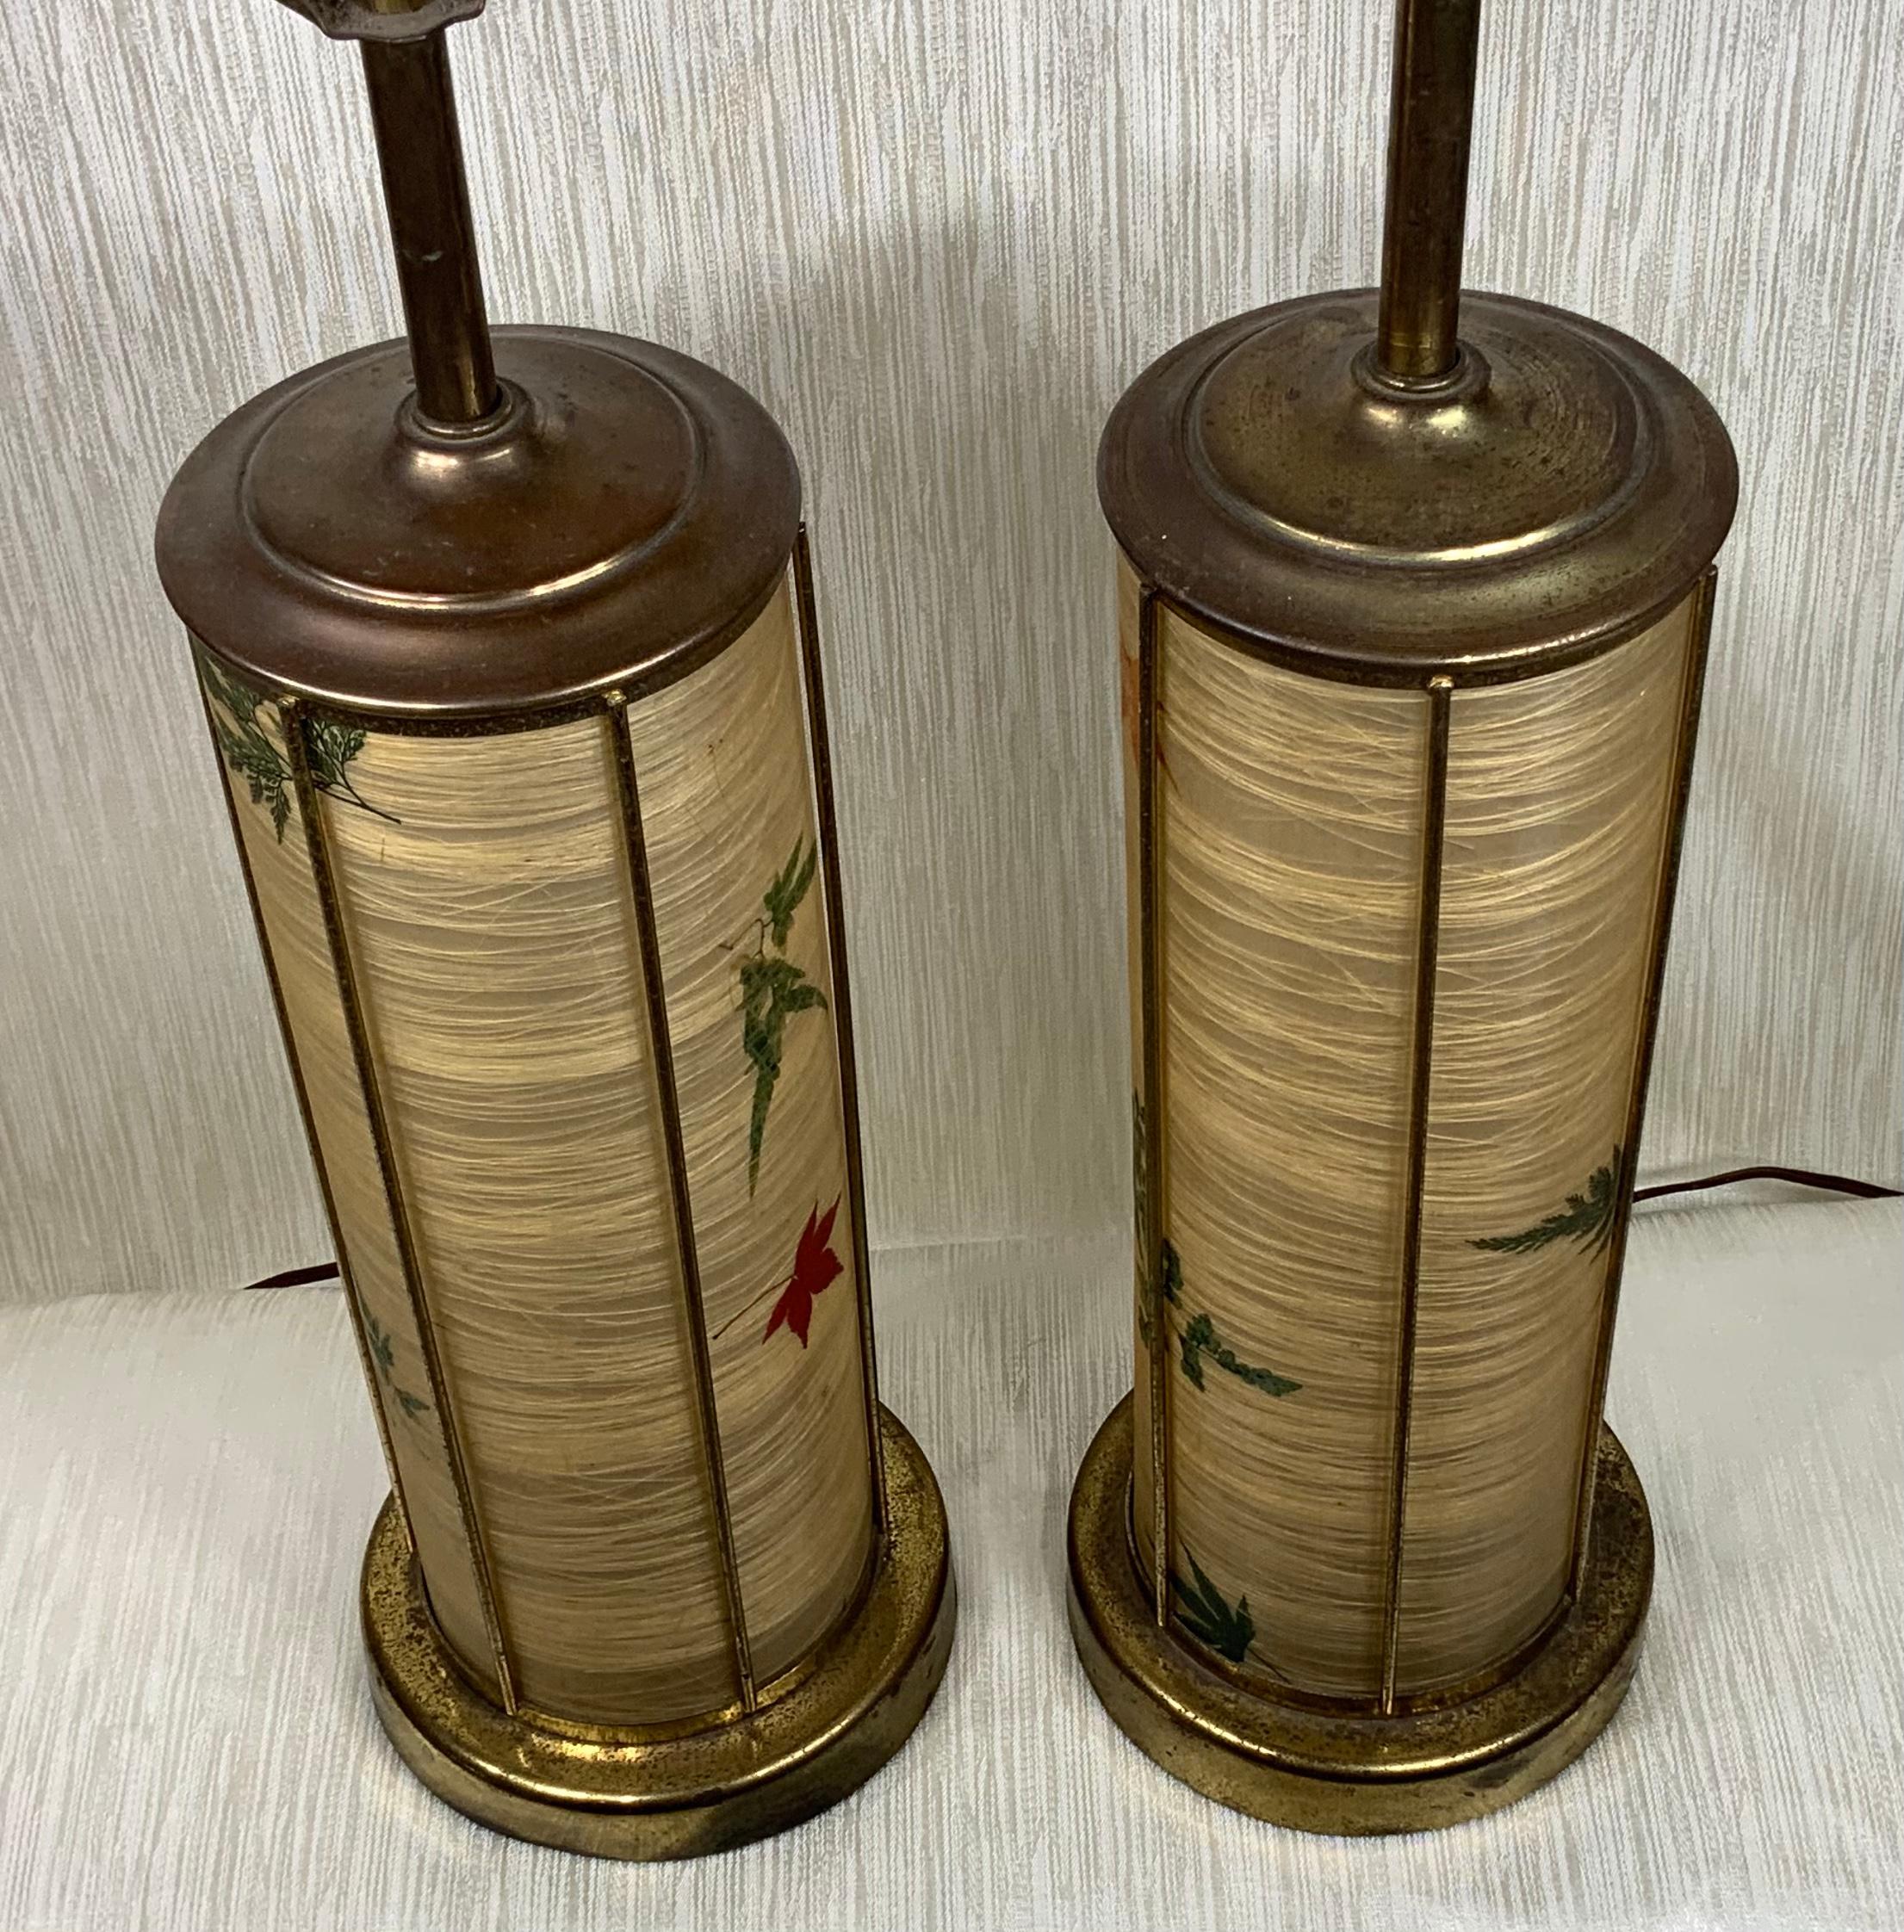 Pair of elegant midcentury table lamps made of brass, with faux parchment shades and base of trees leaves motifs. Included pair of funky lamp finial and three way lighting. Great pair of nostalgic table lamps.